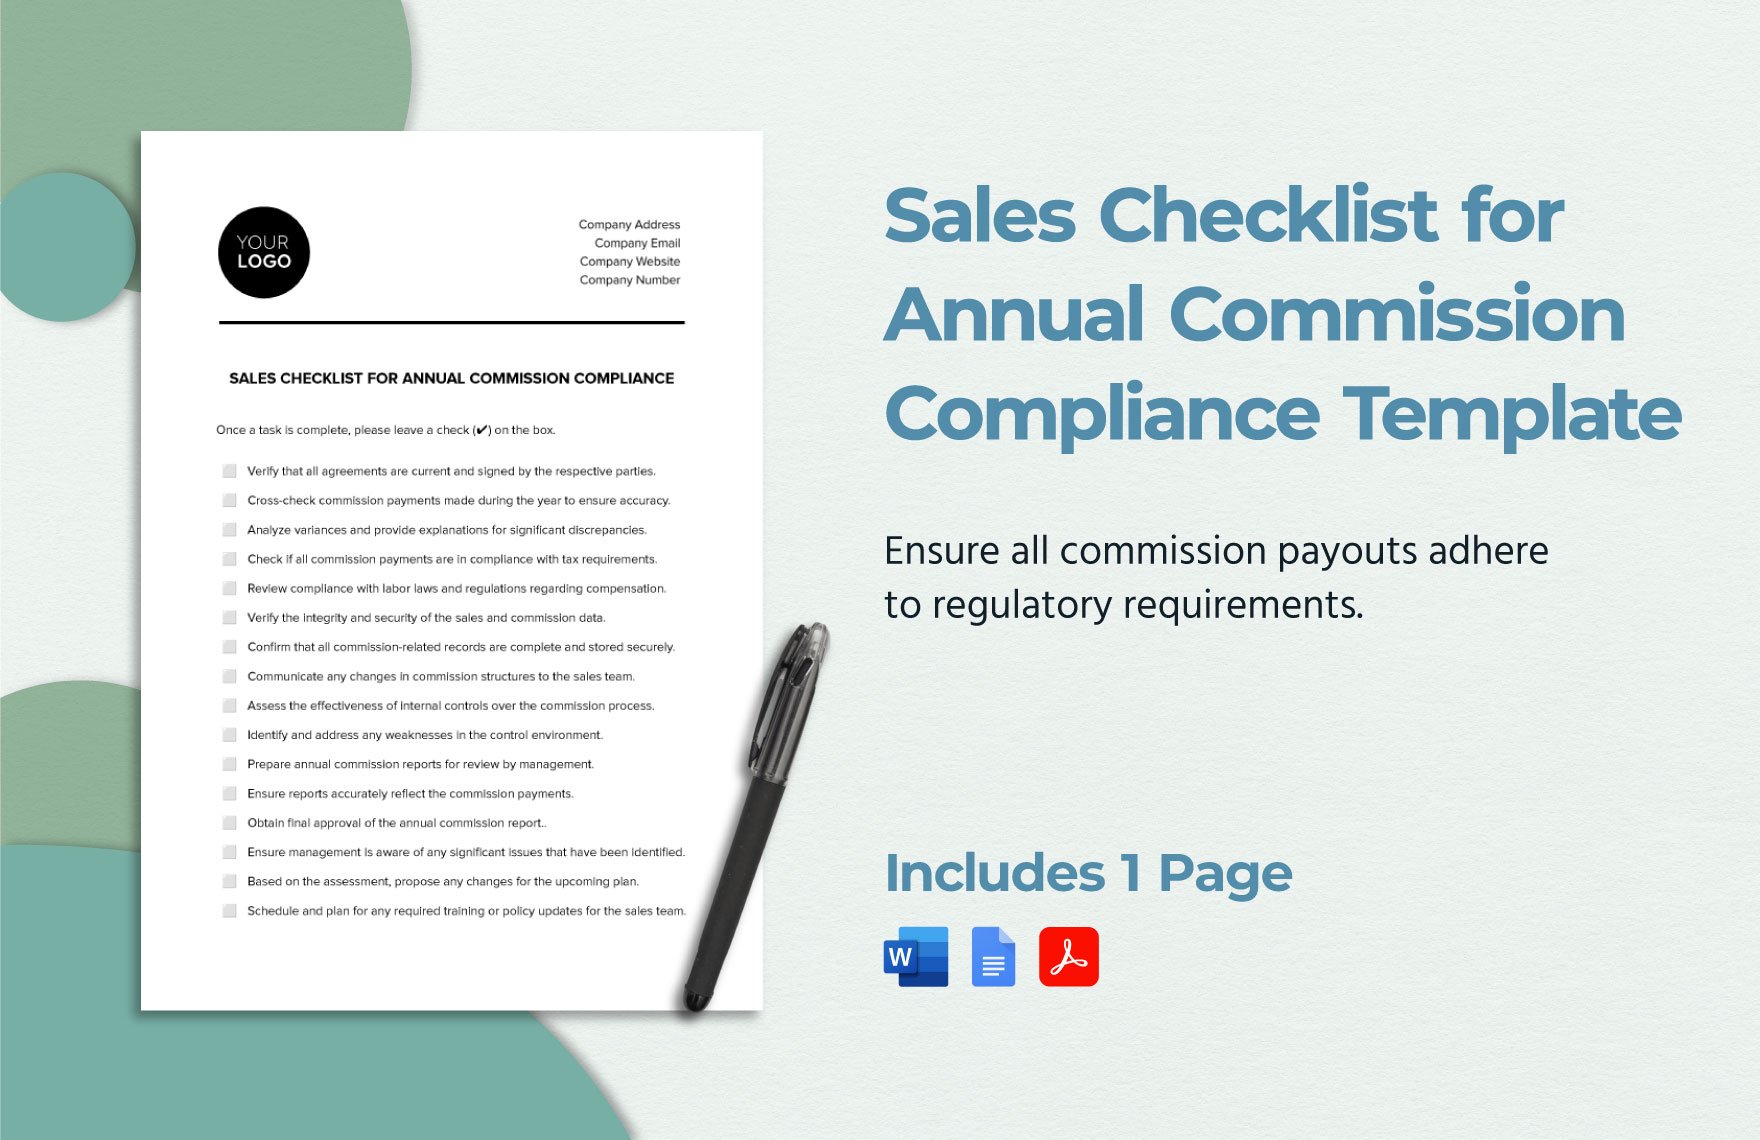 Sales Checklist for Annual Commission Compliance Template in Word, Google Docs, PDF